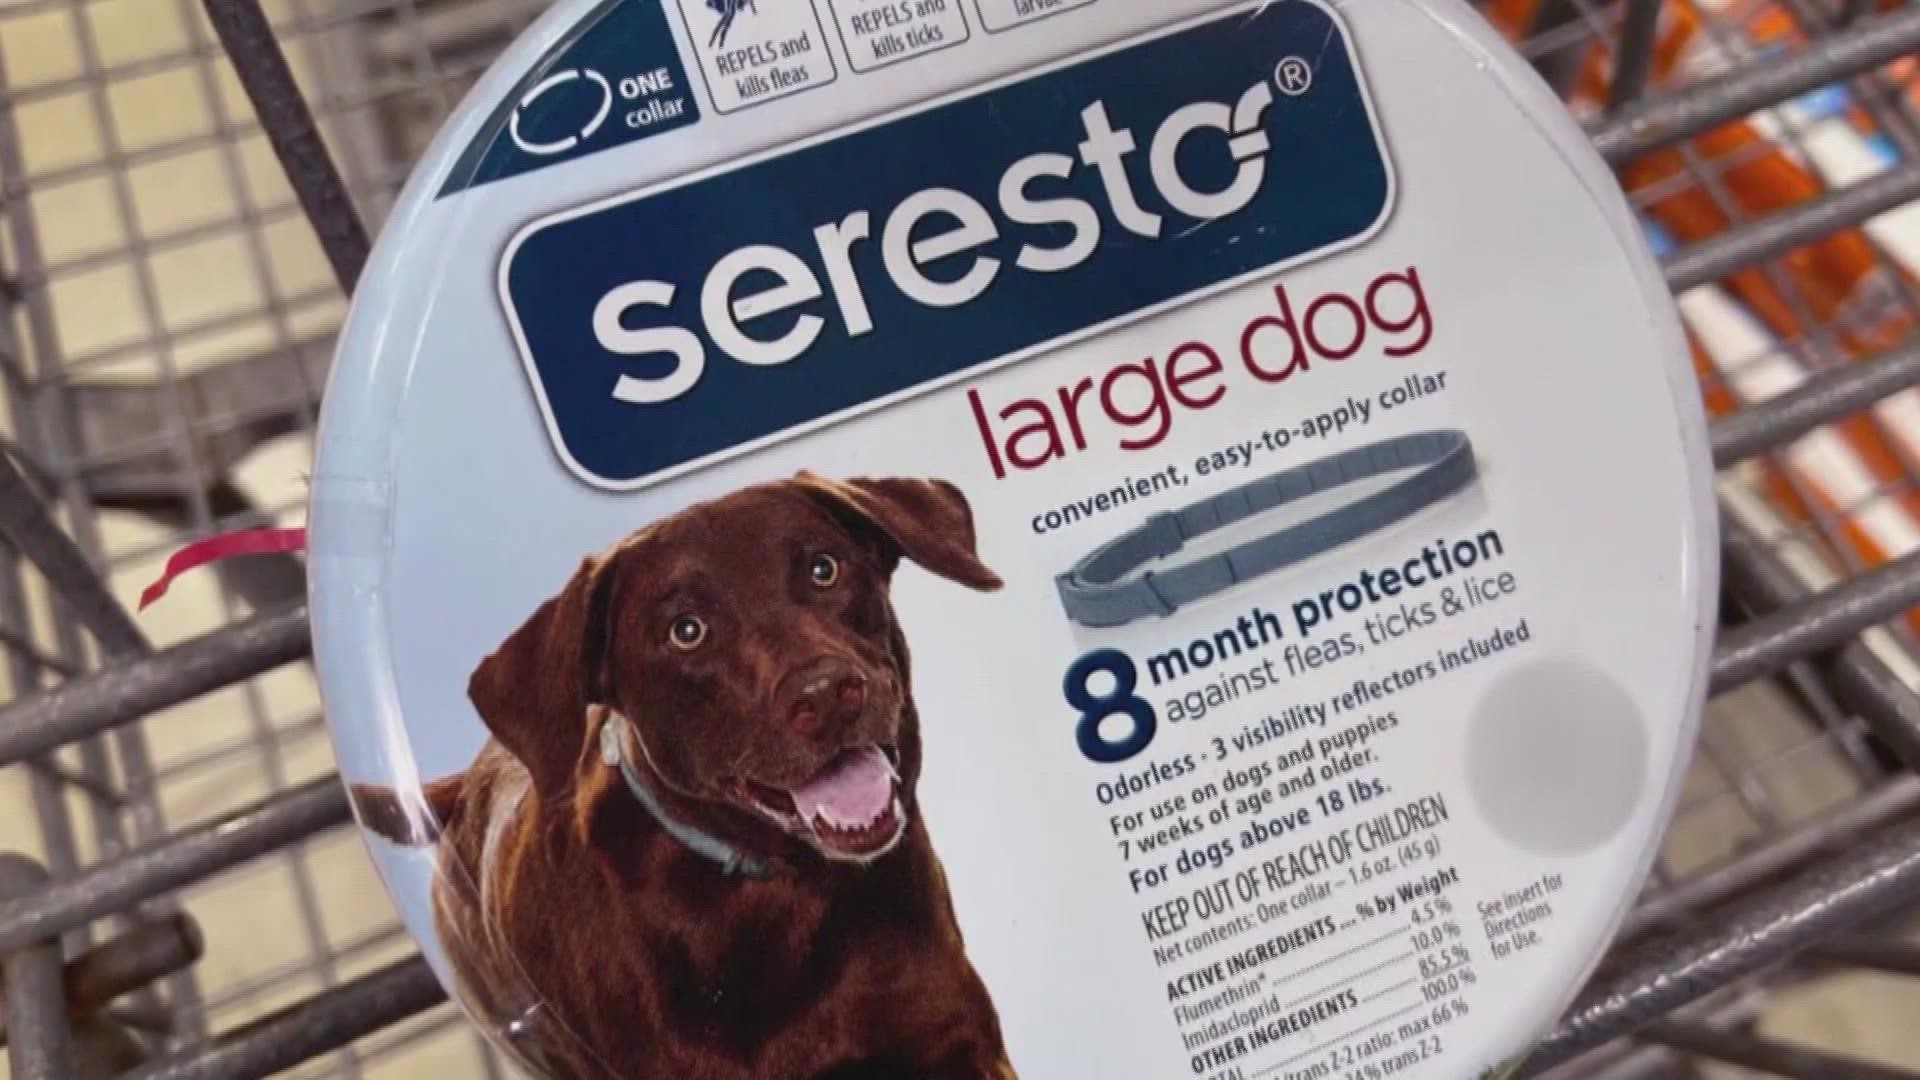 "This particular collar has caused 100,000 incidents reported to the EPA, and over 2,500 pet deaths," a lawmaker said about Seresto.